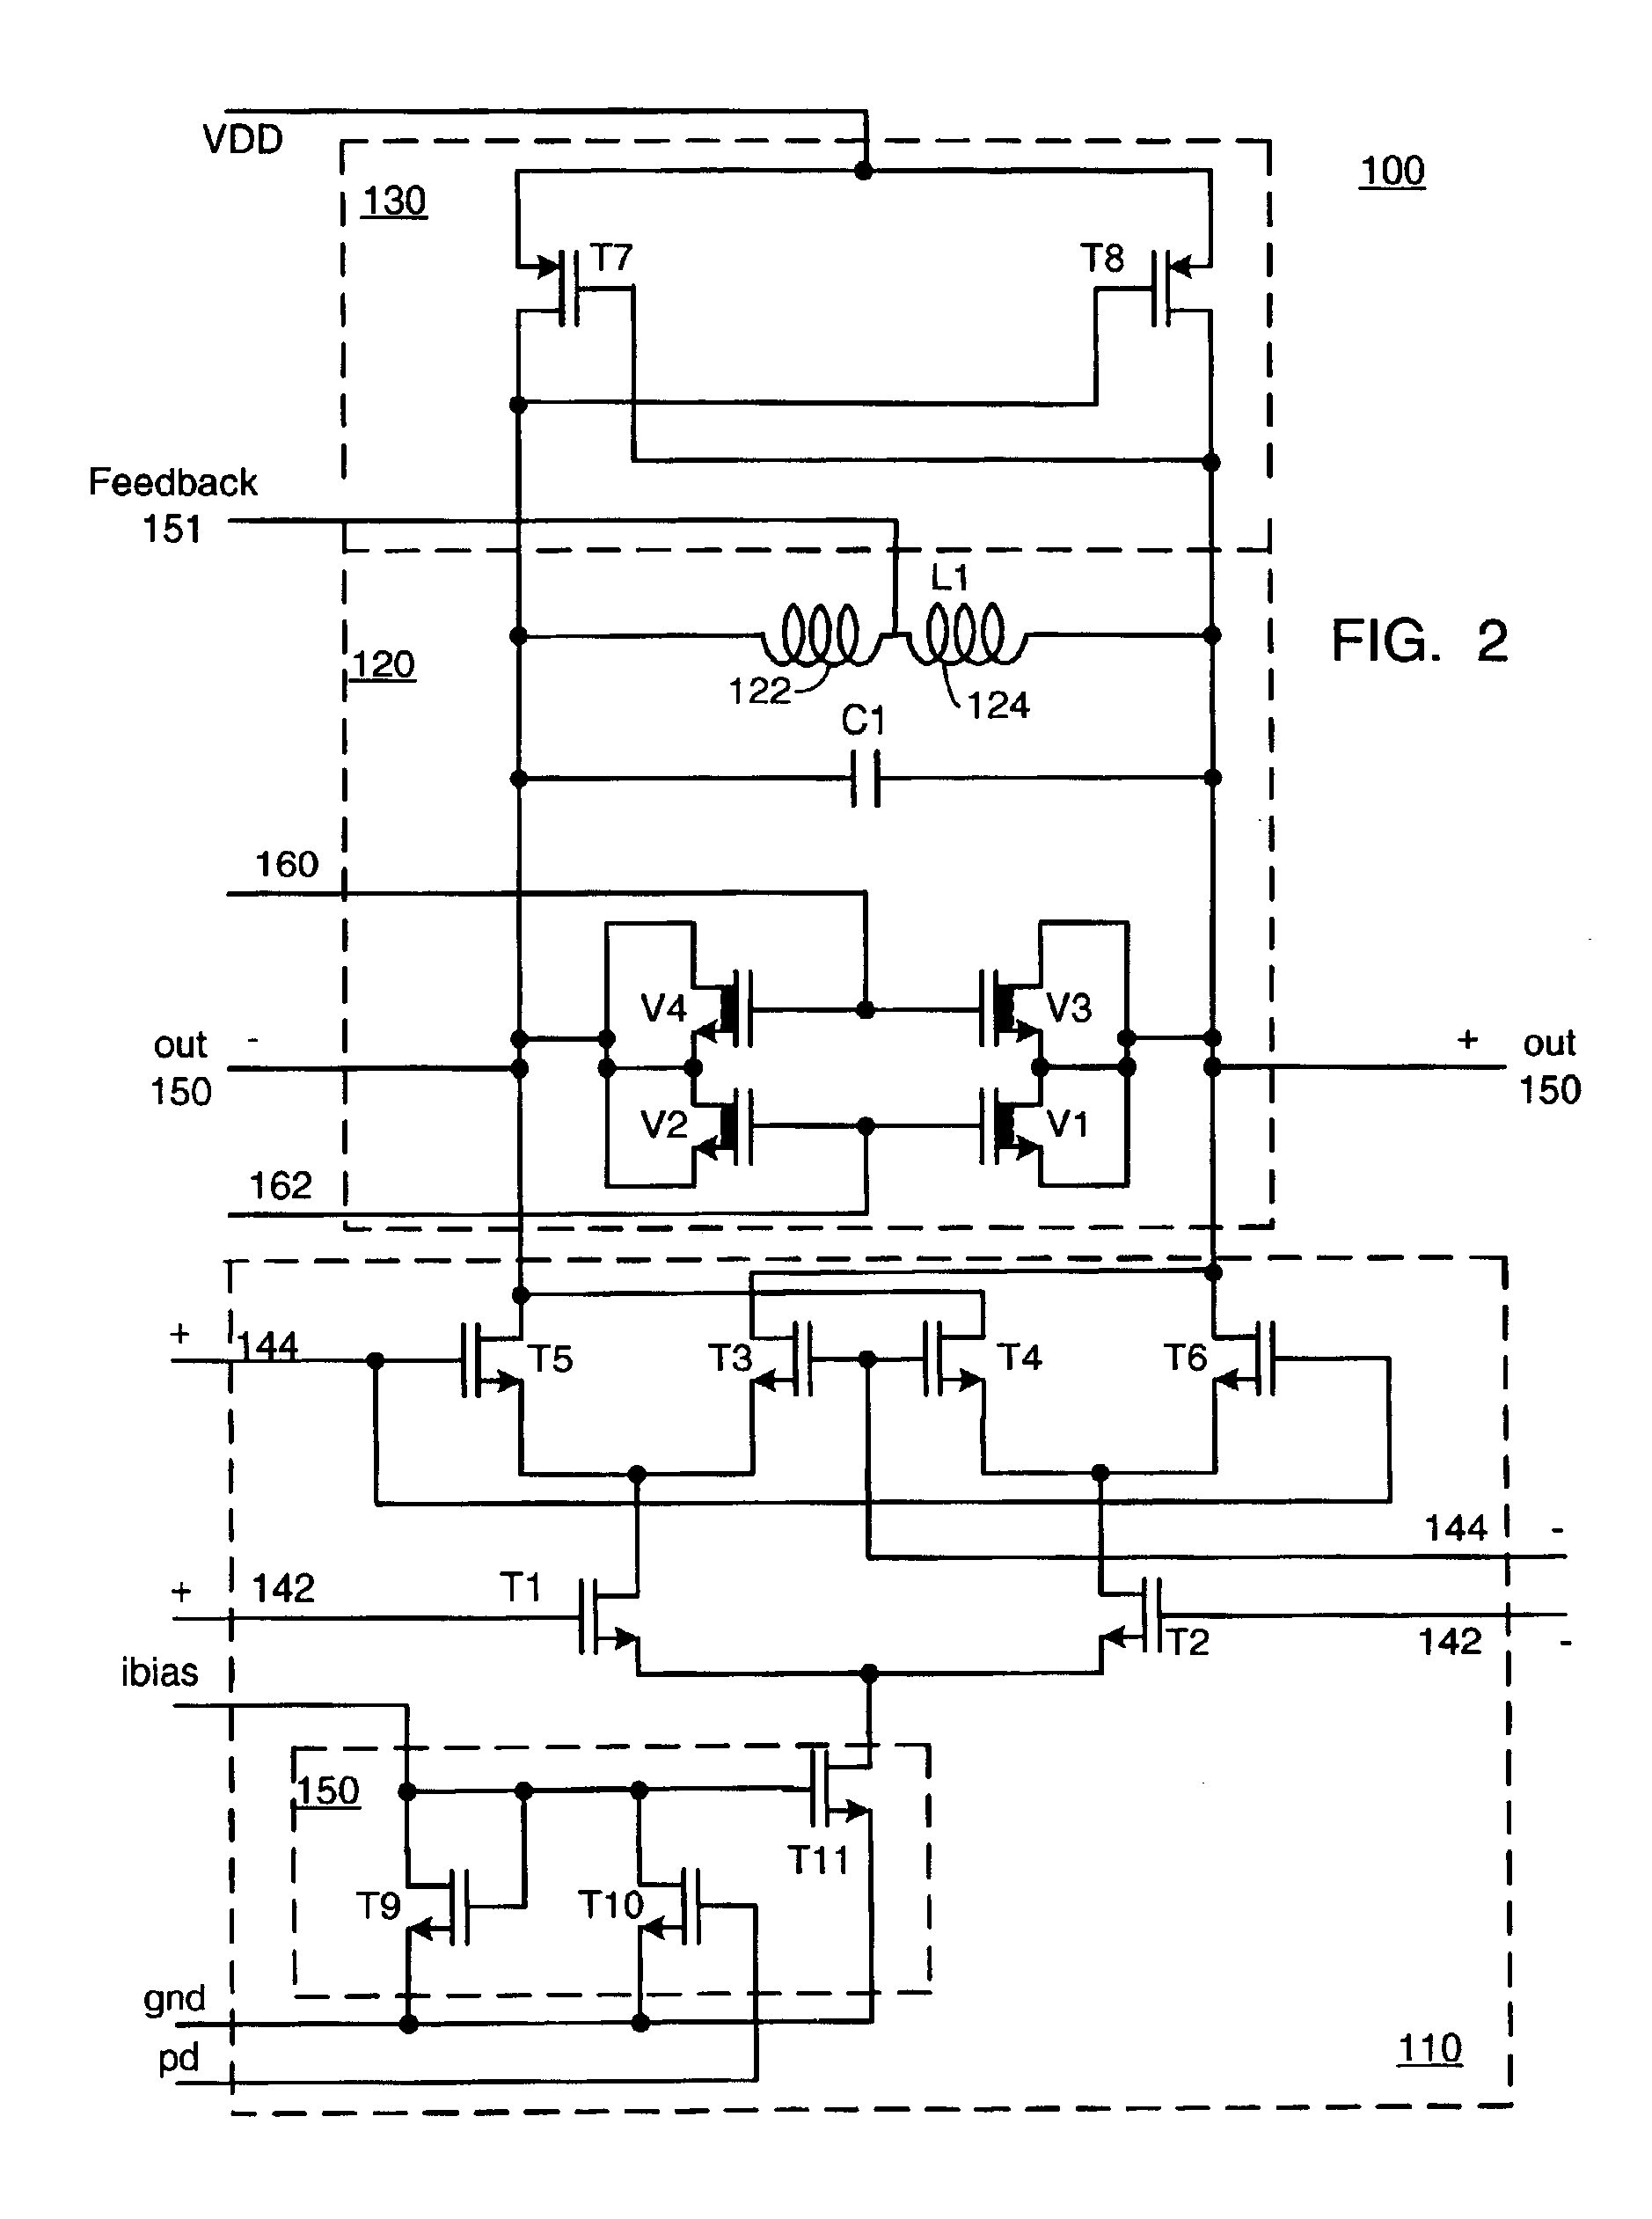 Frequency multiplier and amplification circuit